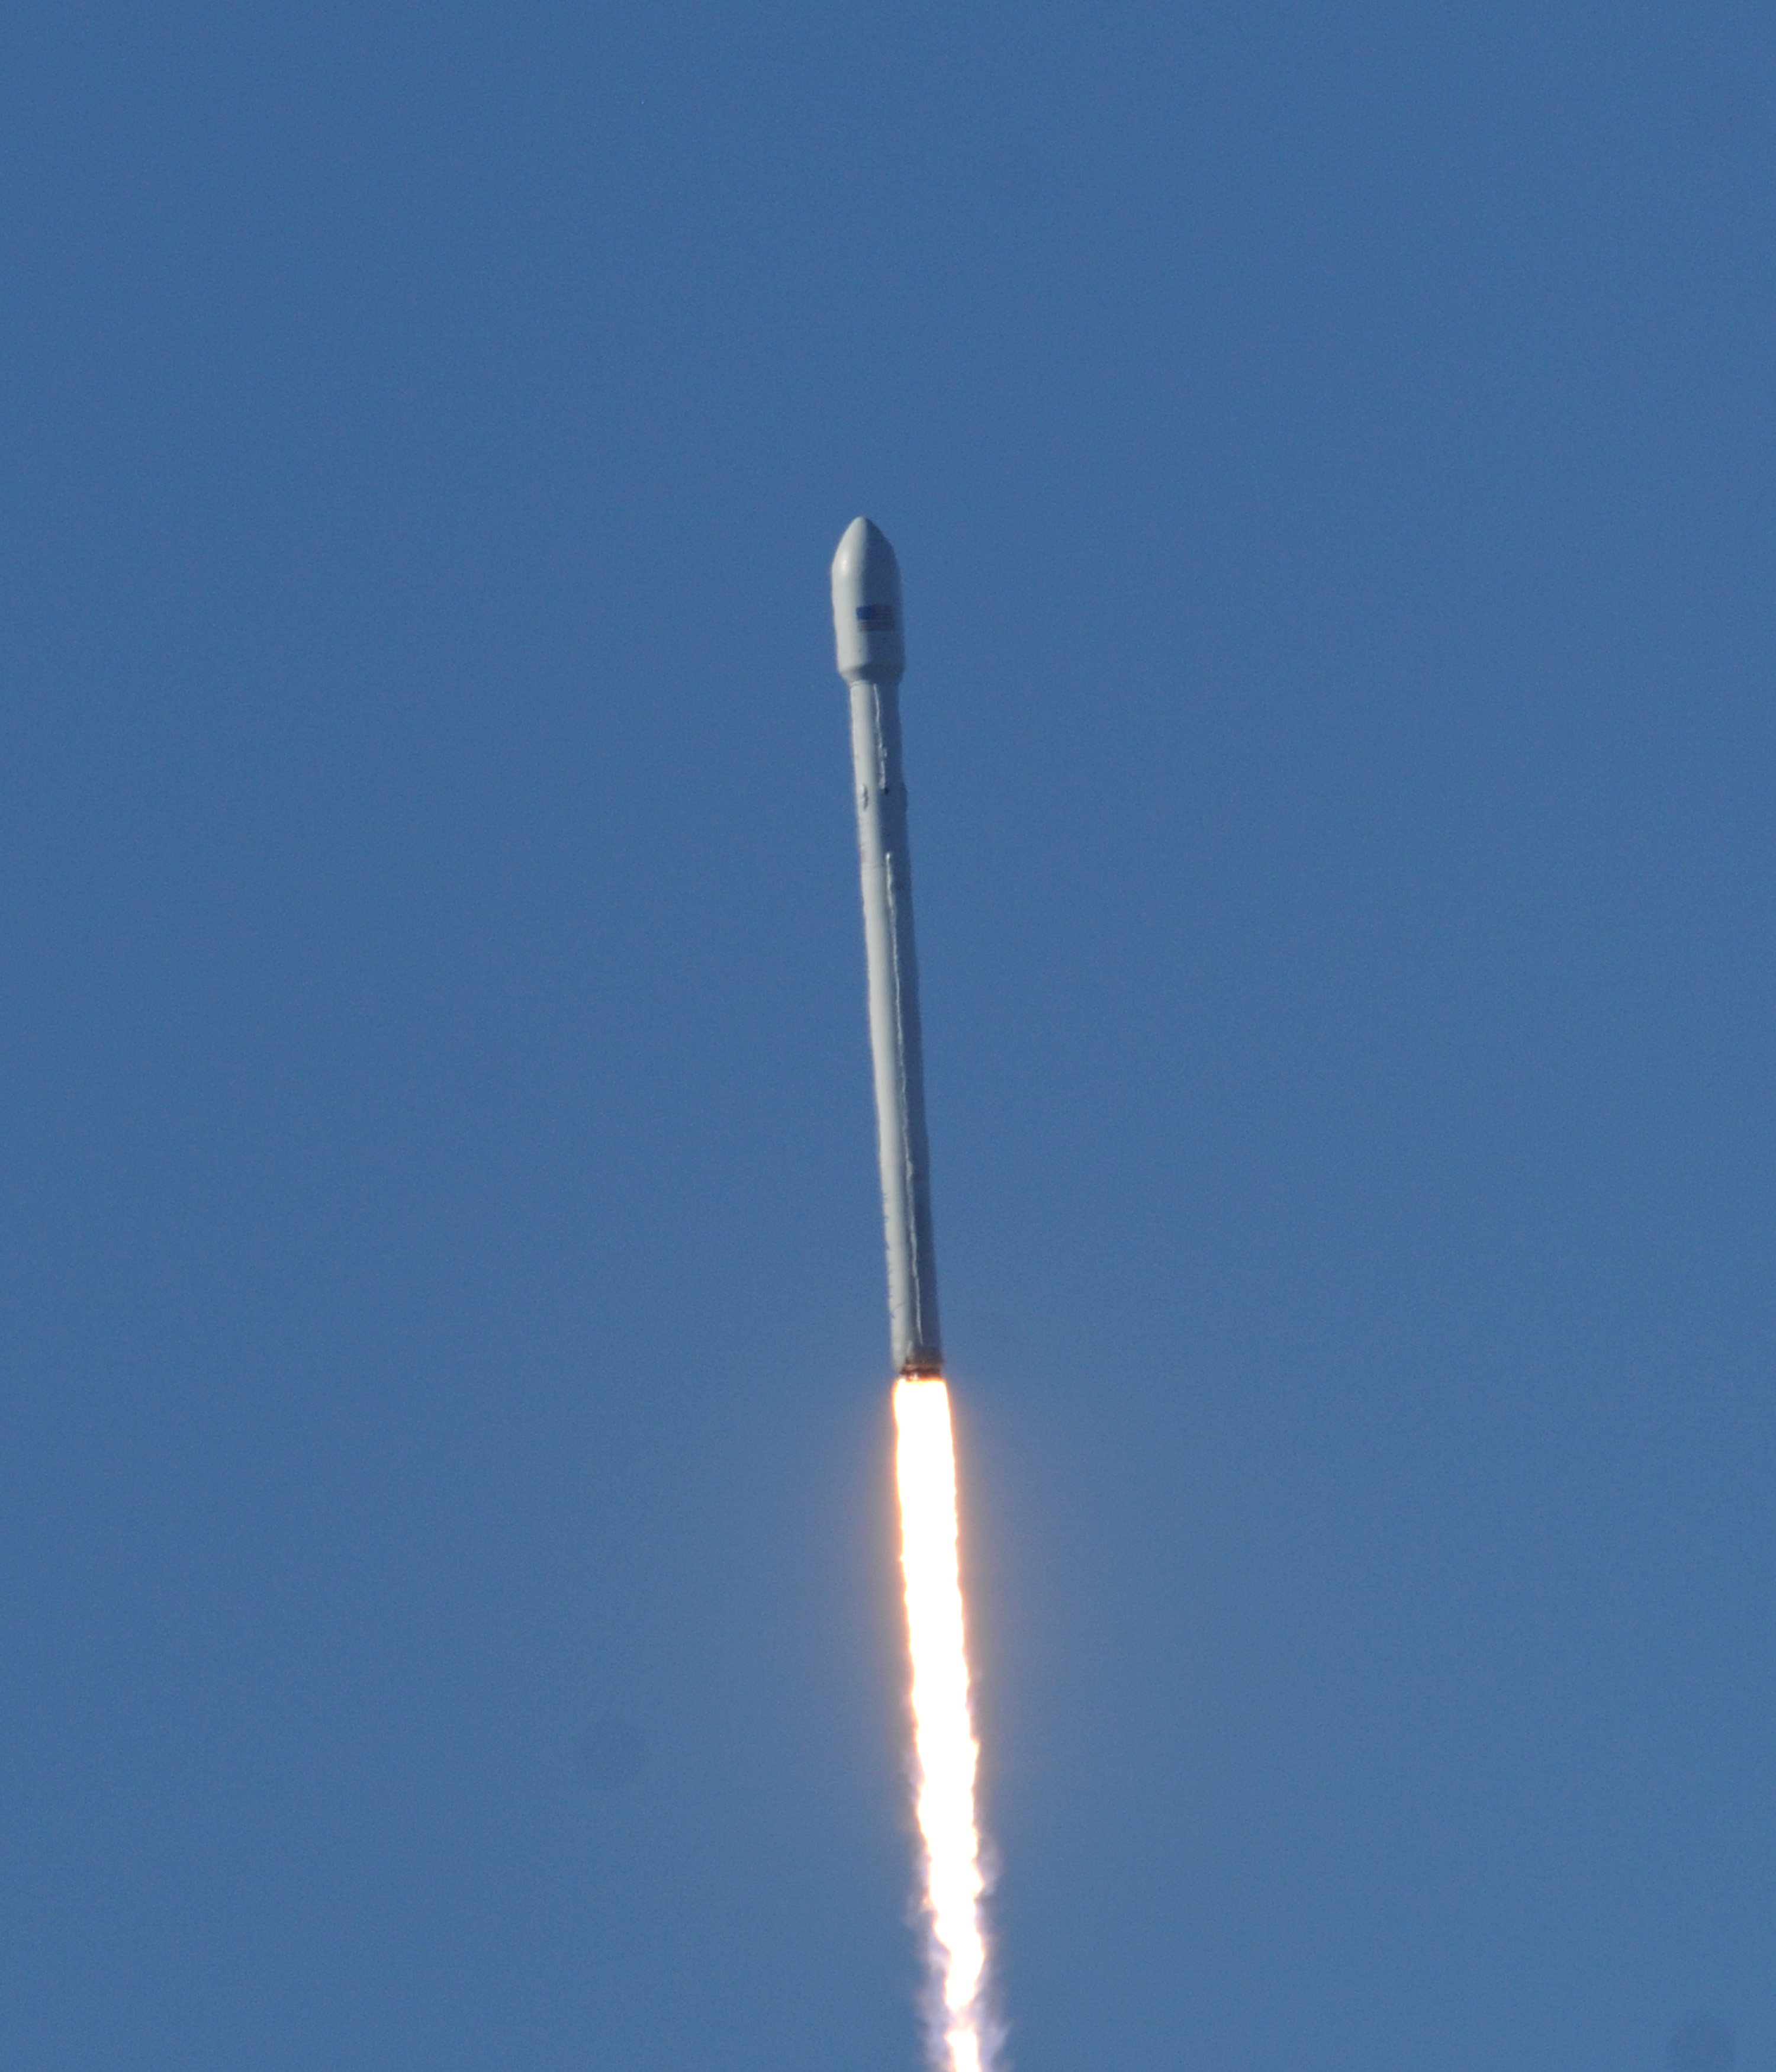 SpaceX Falcon 9 Kit   Pics about space